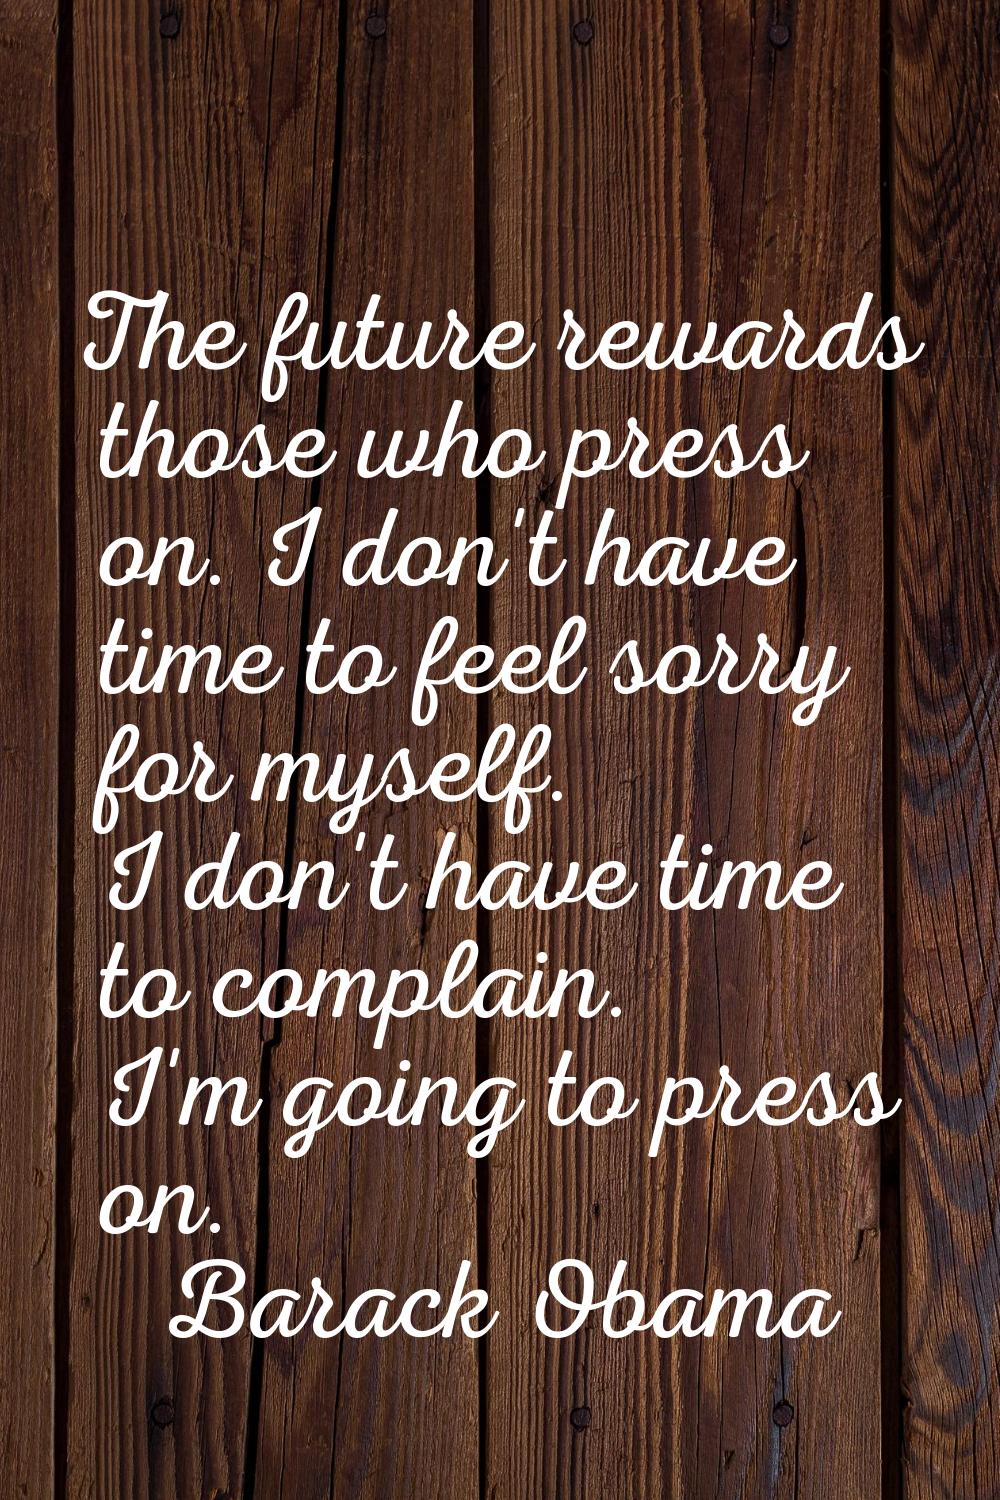 The future rewards those who press on. I don't have time to feel sorry for myself. I don't have tim